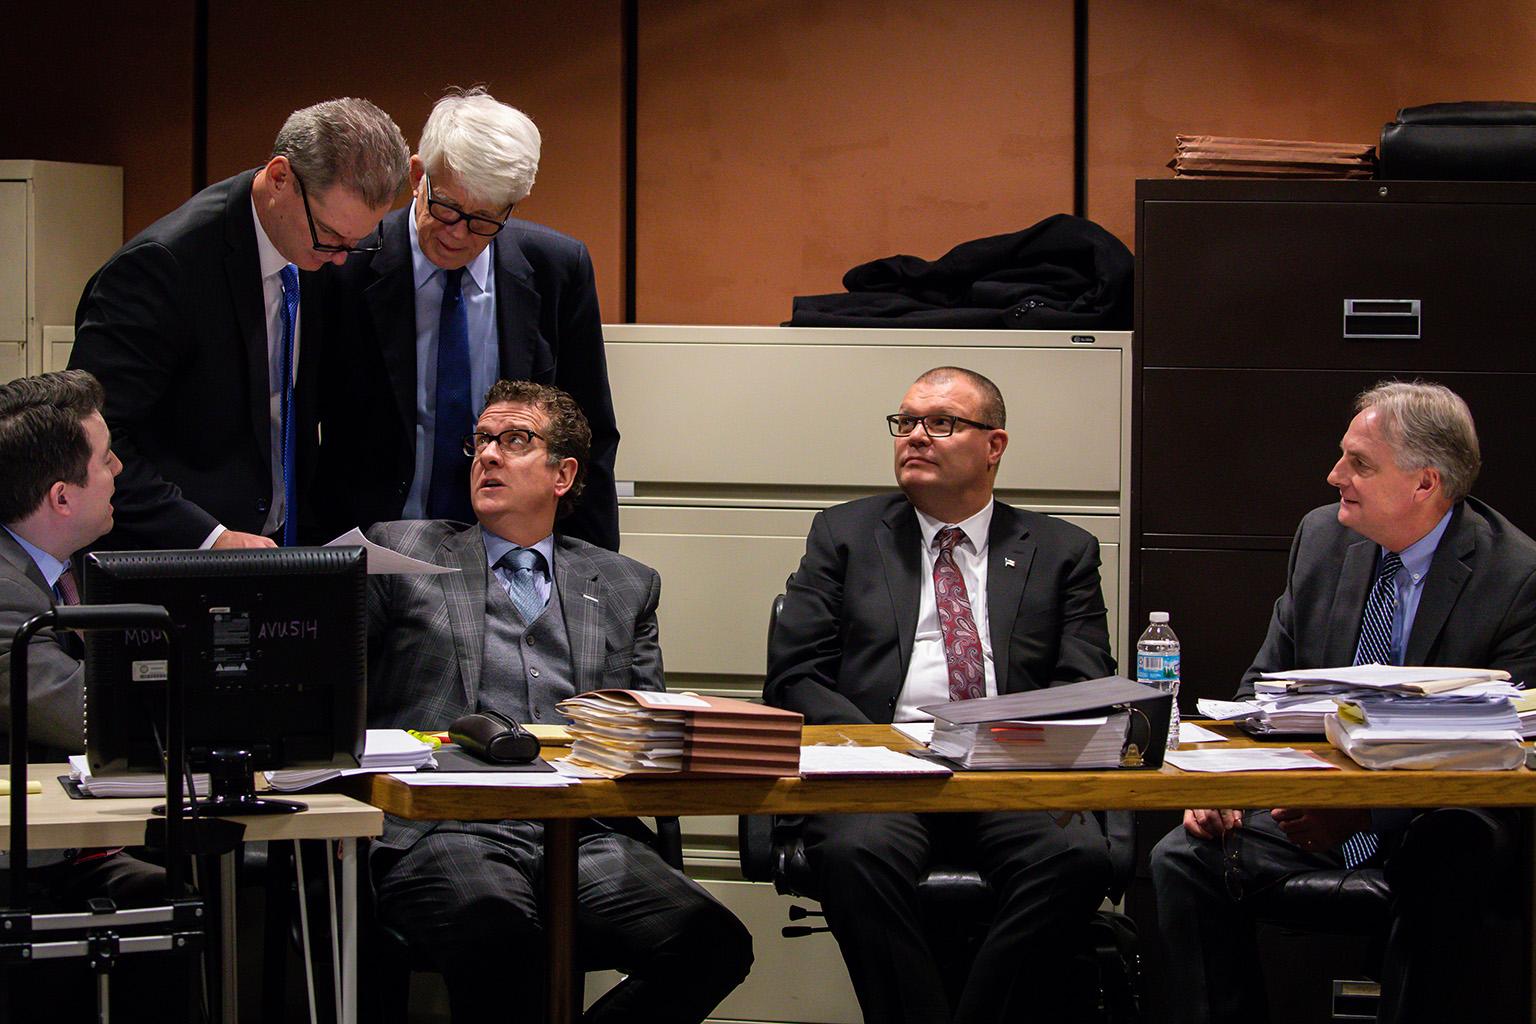 Defense attorneys confer before prosecution rested during the trial of Chicago police Officer Thomas Gaffney, former Detective David March and ex-Officer Joseph Walsh on Tuesday, Dec. 4, 2018. (Zbigniew Bzdak / Chicago Tribune / Pool)